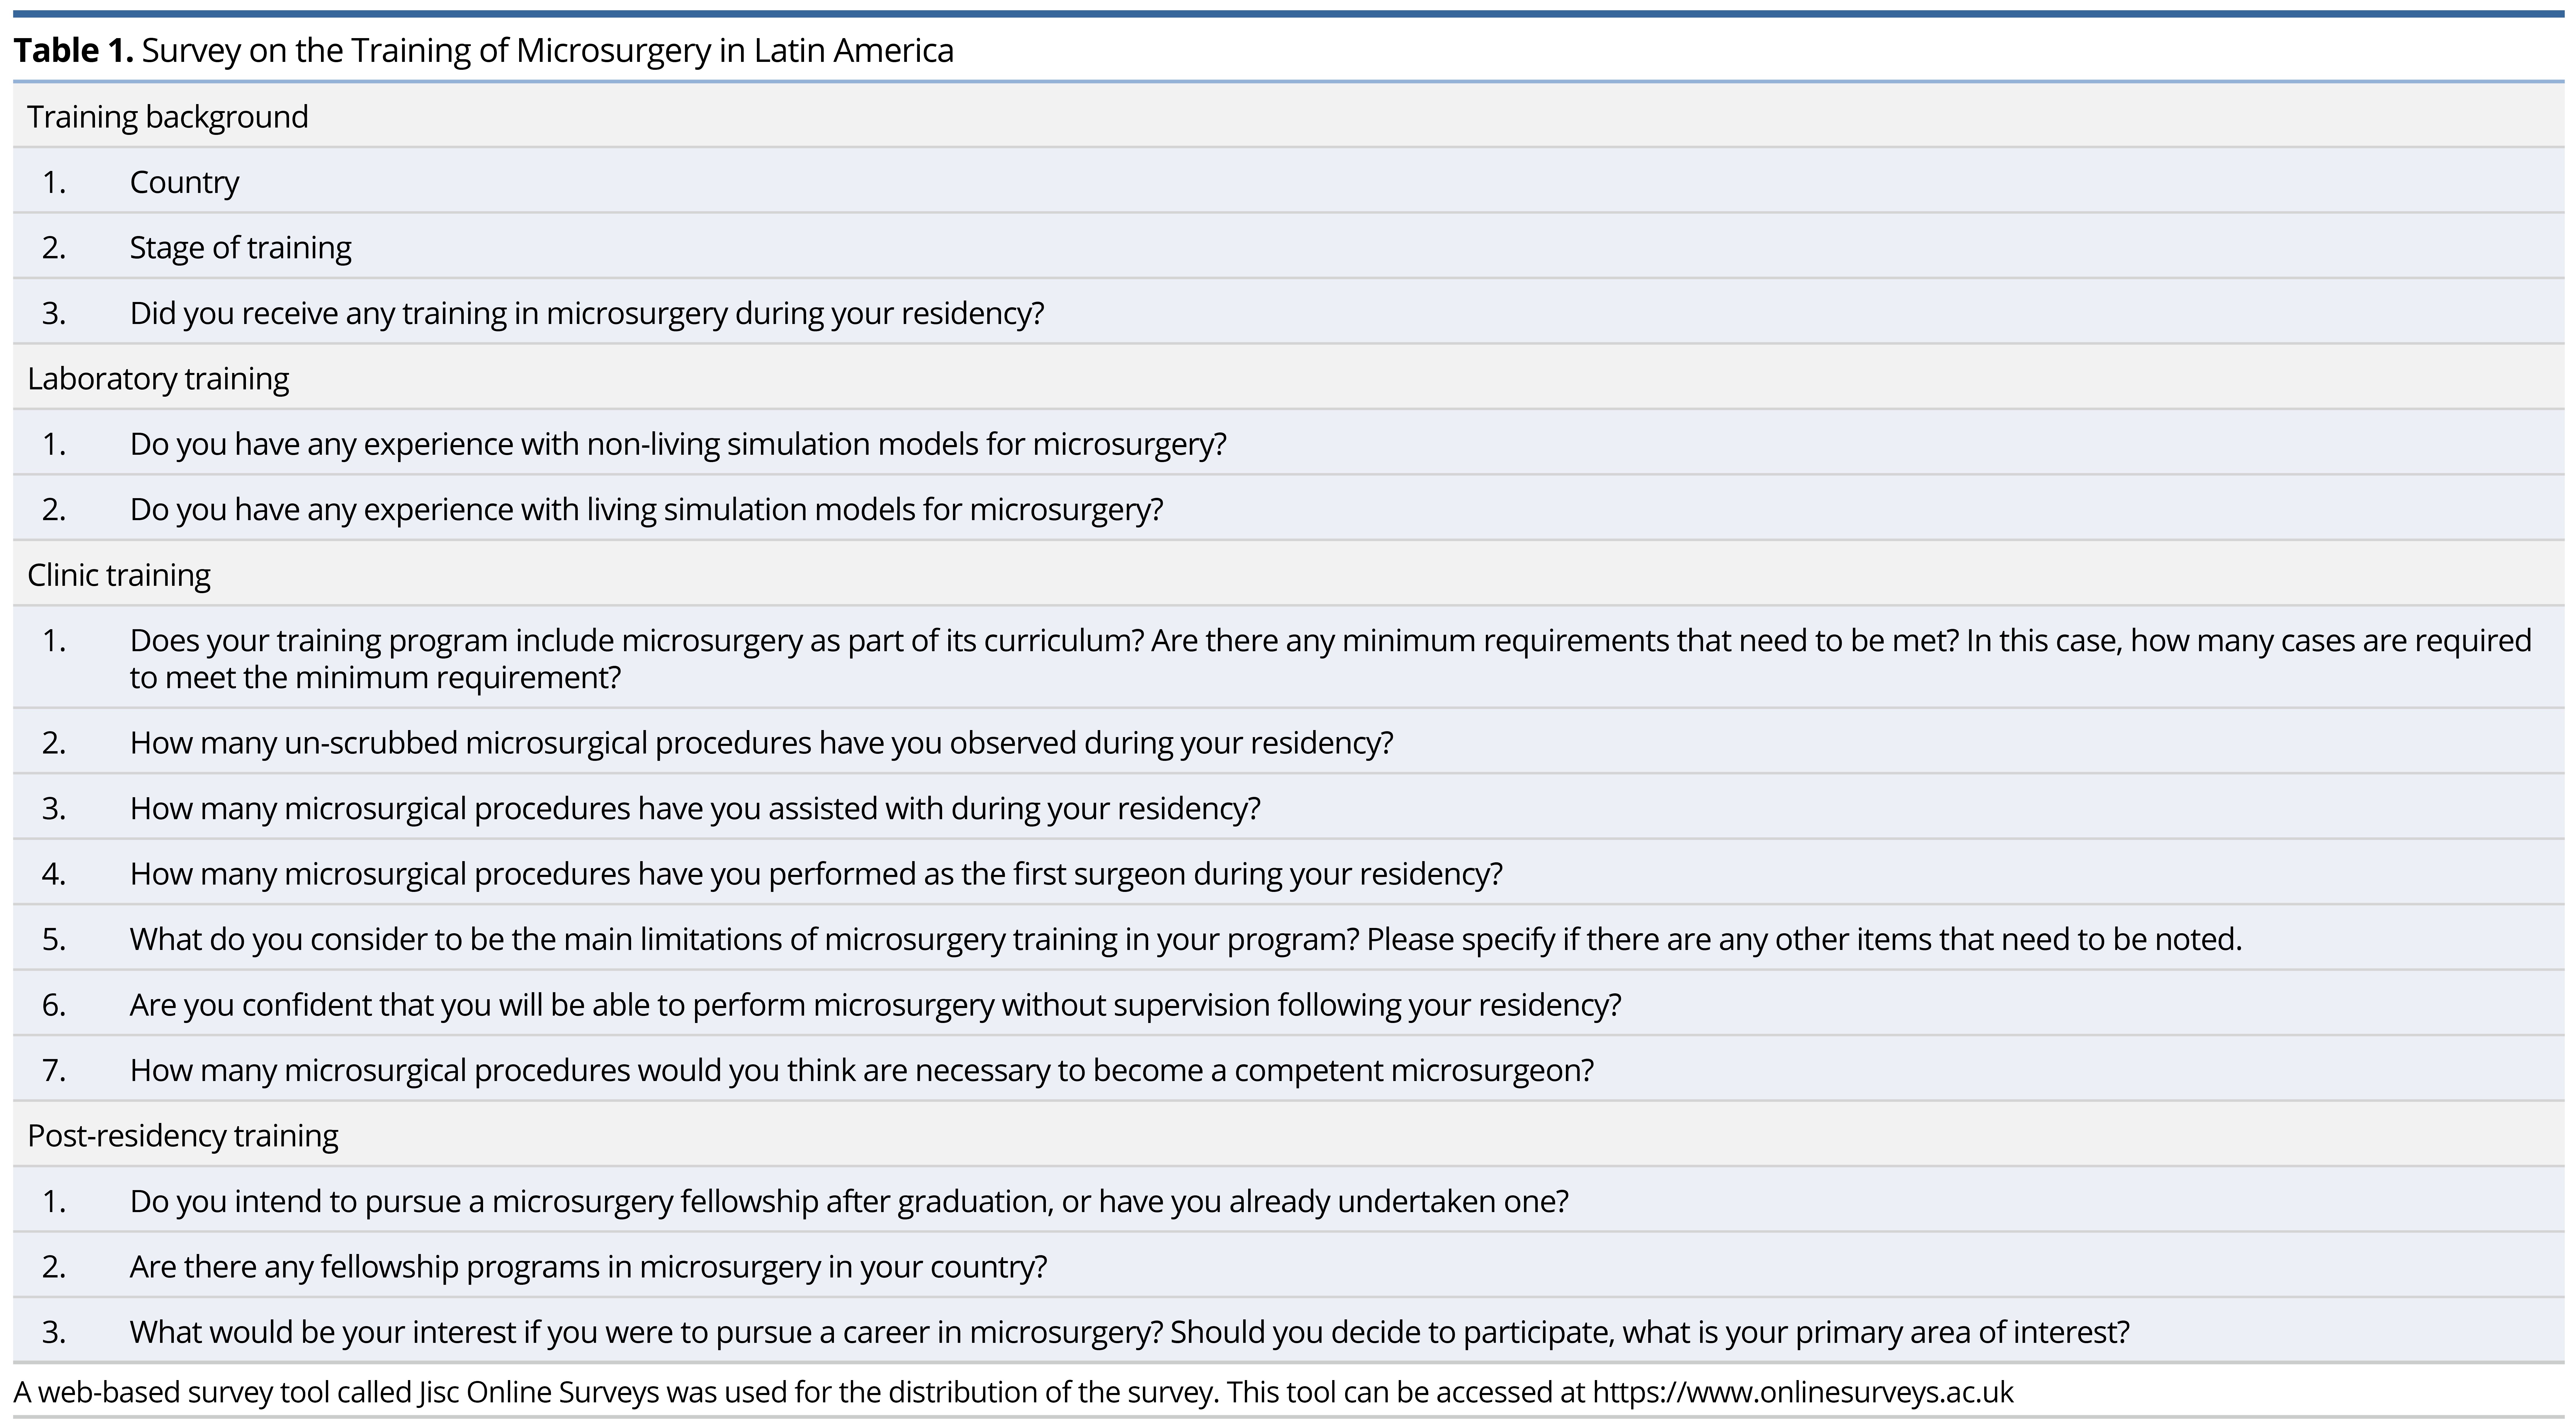 Table 1.jpgSurvey on the Training of Microsurgery in Latin America